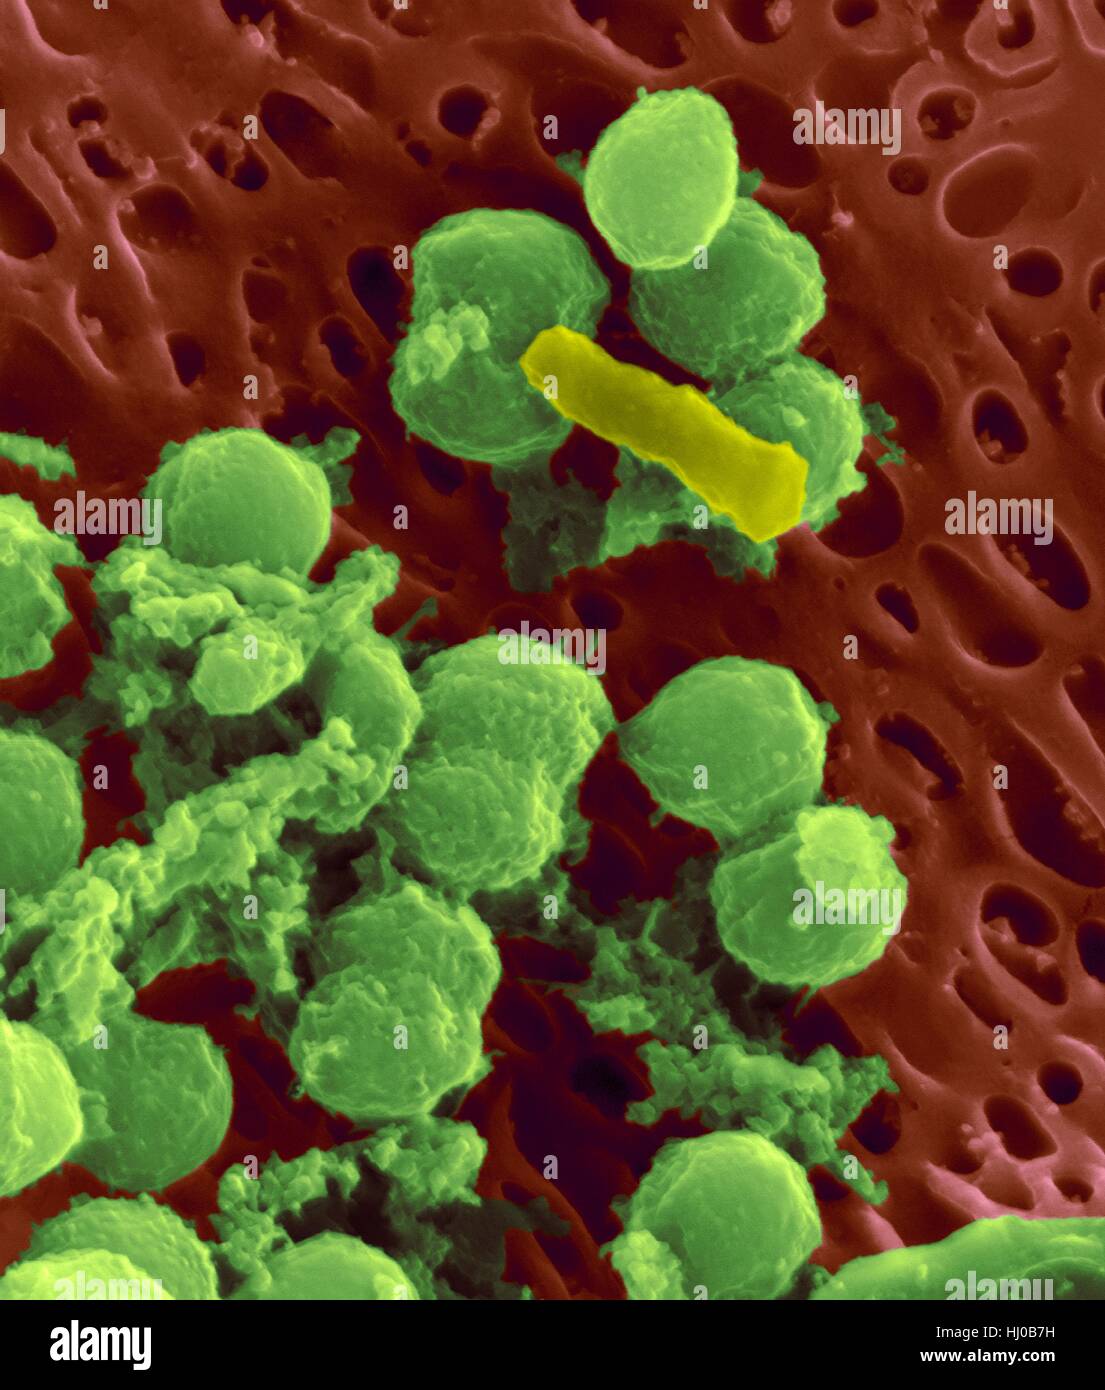 Bacteria on an epithelial cell from the human tongue filiform papilla, coloured scanning electron micrograph (SEM). Coccoid bacteria (likely Streptococcus mutans due to the fibrous glucan matrix that surrounds the cells) and one rod bacterium are seen on the epithelial surface. Most bacteria on the human tongue are harmless or even beneficial. However some bacteria can cause throat infections and form plaque deposits on teeth. Plaque will also lead to tooth decay and periodontal disease. Magnification: x5, 000 when shortest axis printed at 25 millimetres. Stock Photo